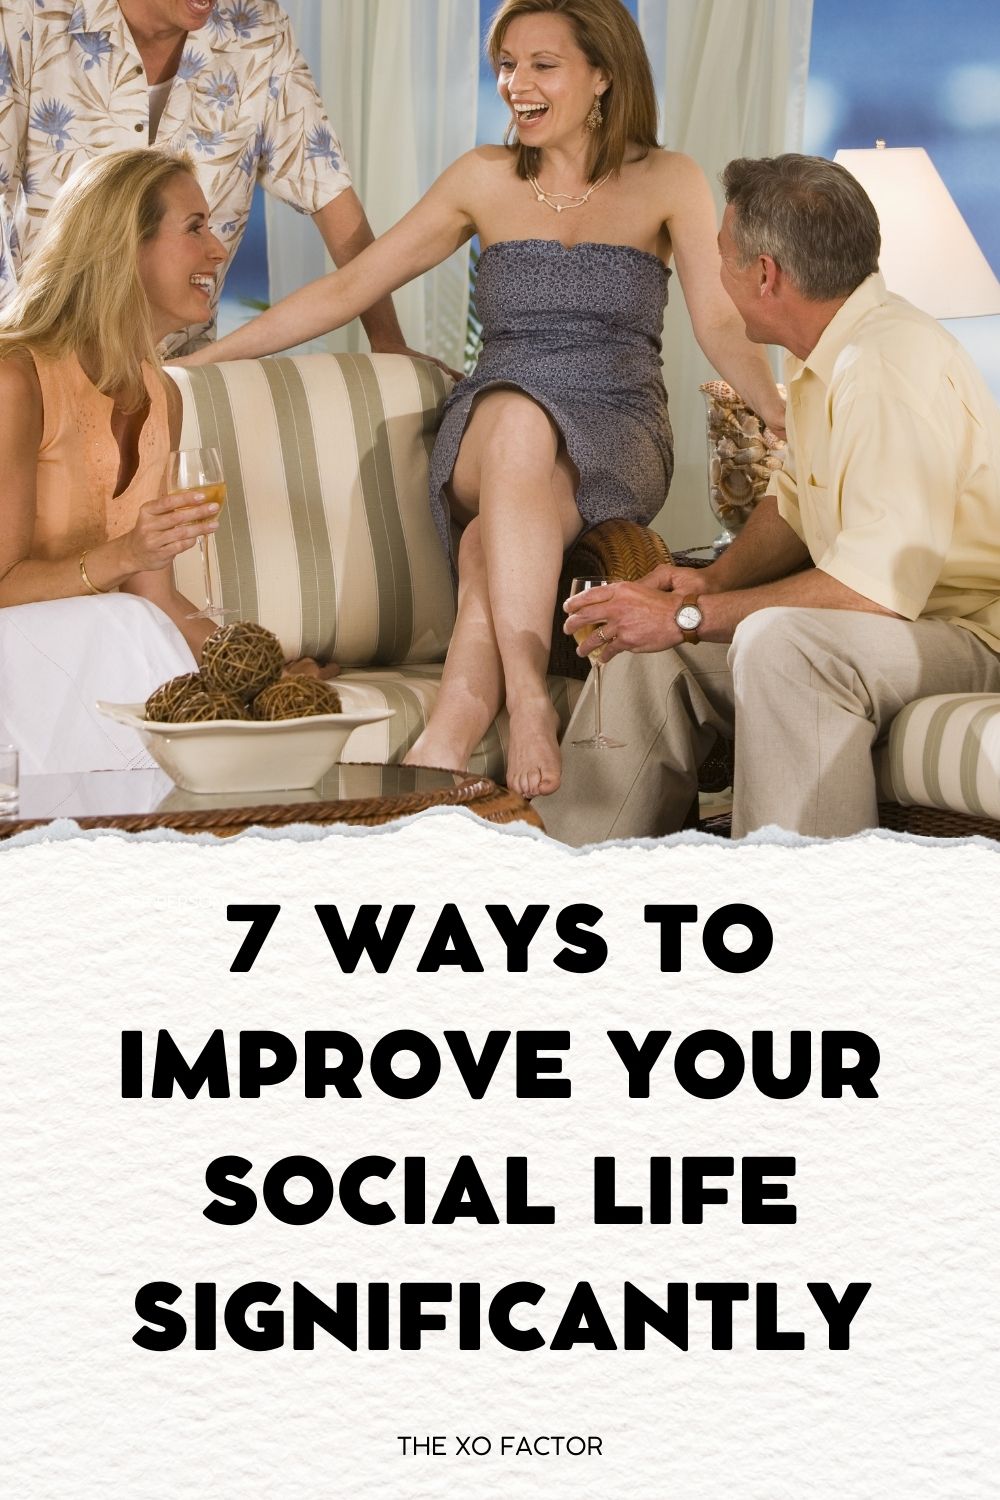 7 Ways To Improve Your Social Life Significantly